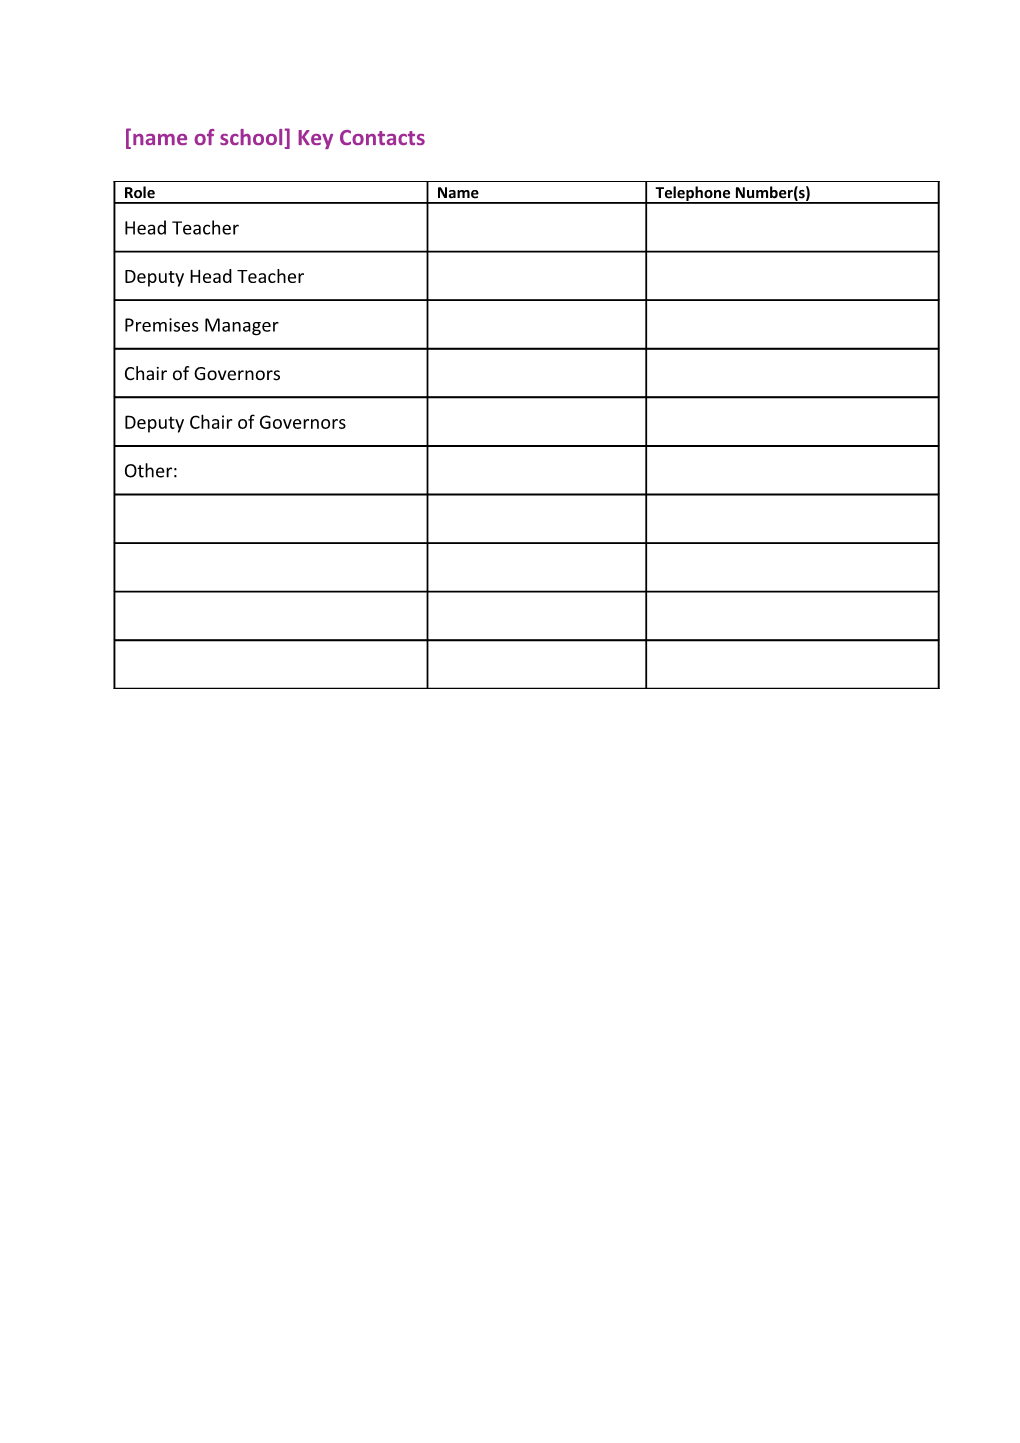 Resource Sheet 2 Contacts List